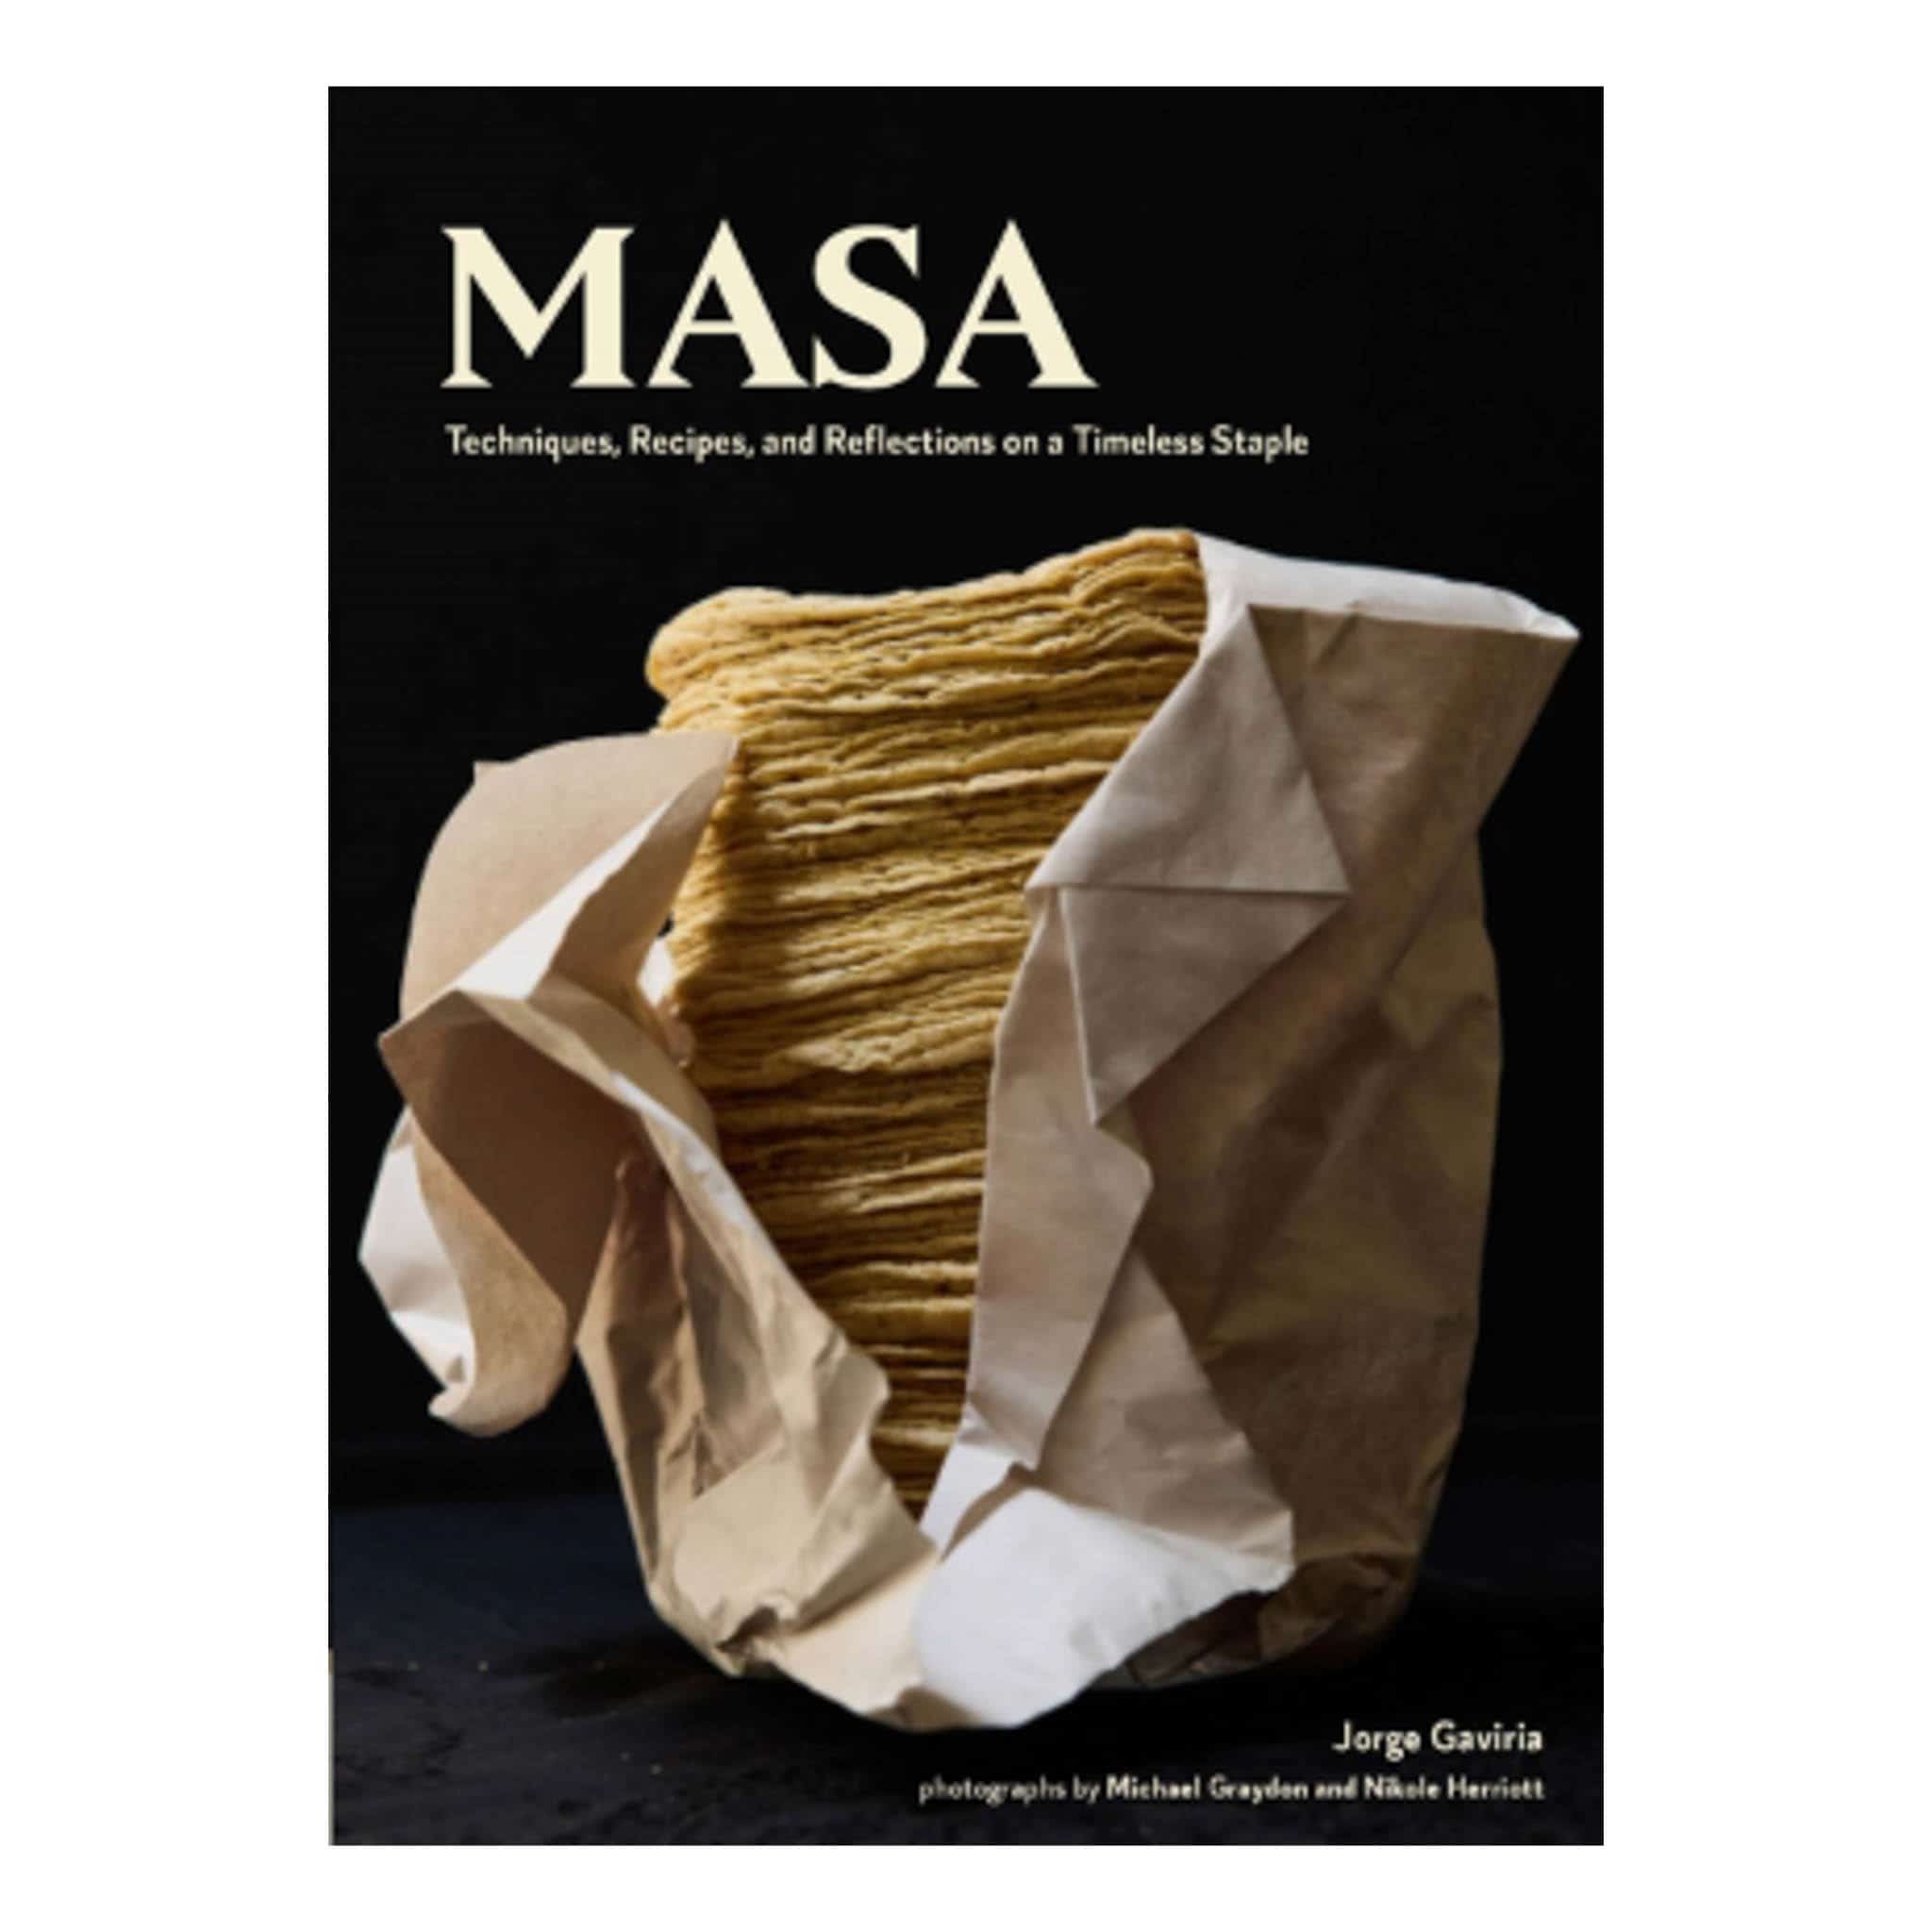 Masa: Techniques, Recipies, and Reflections on a Timeless Staple by Jorge Gaviria